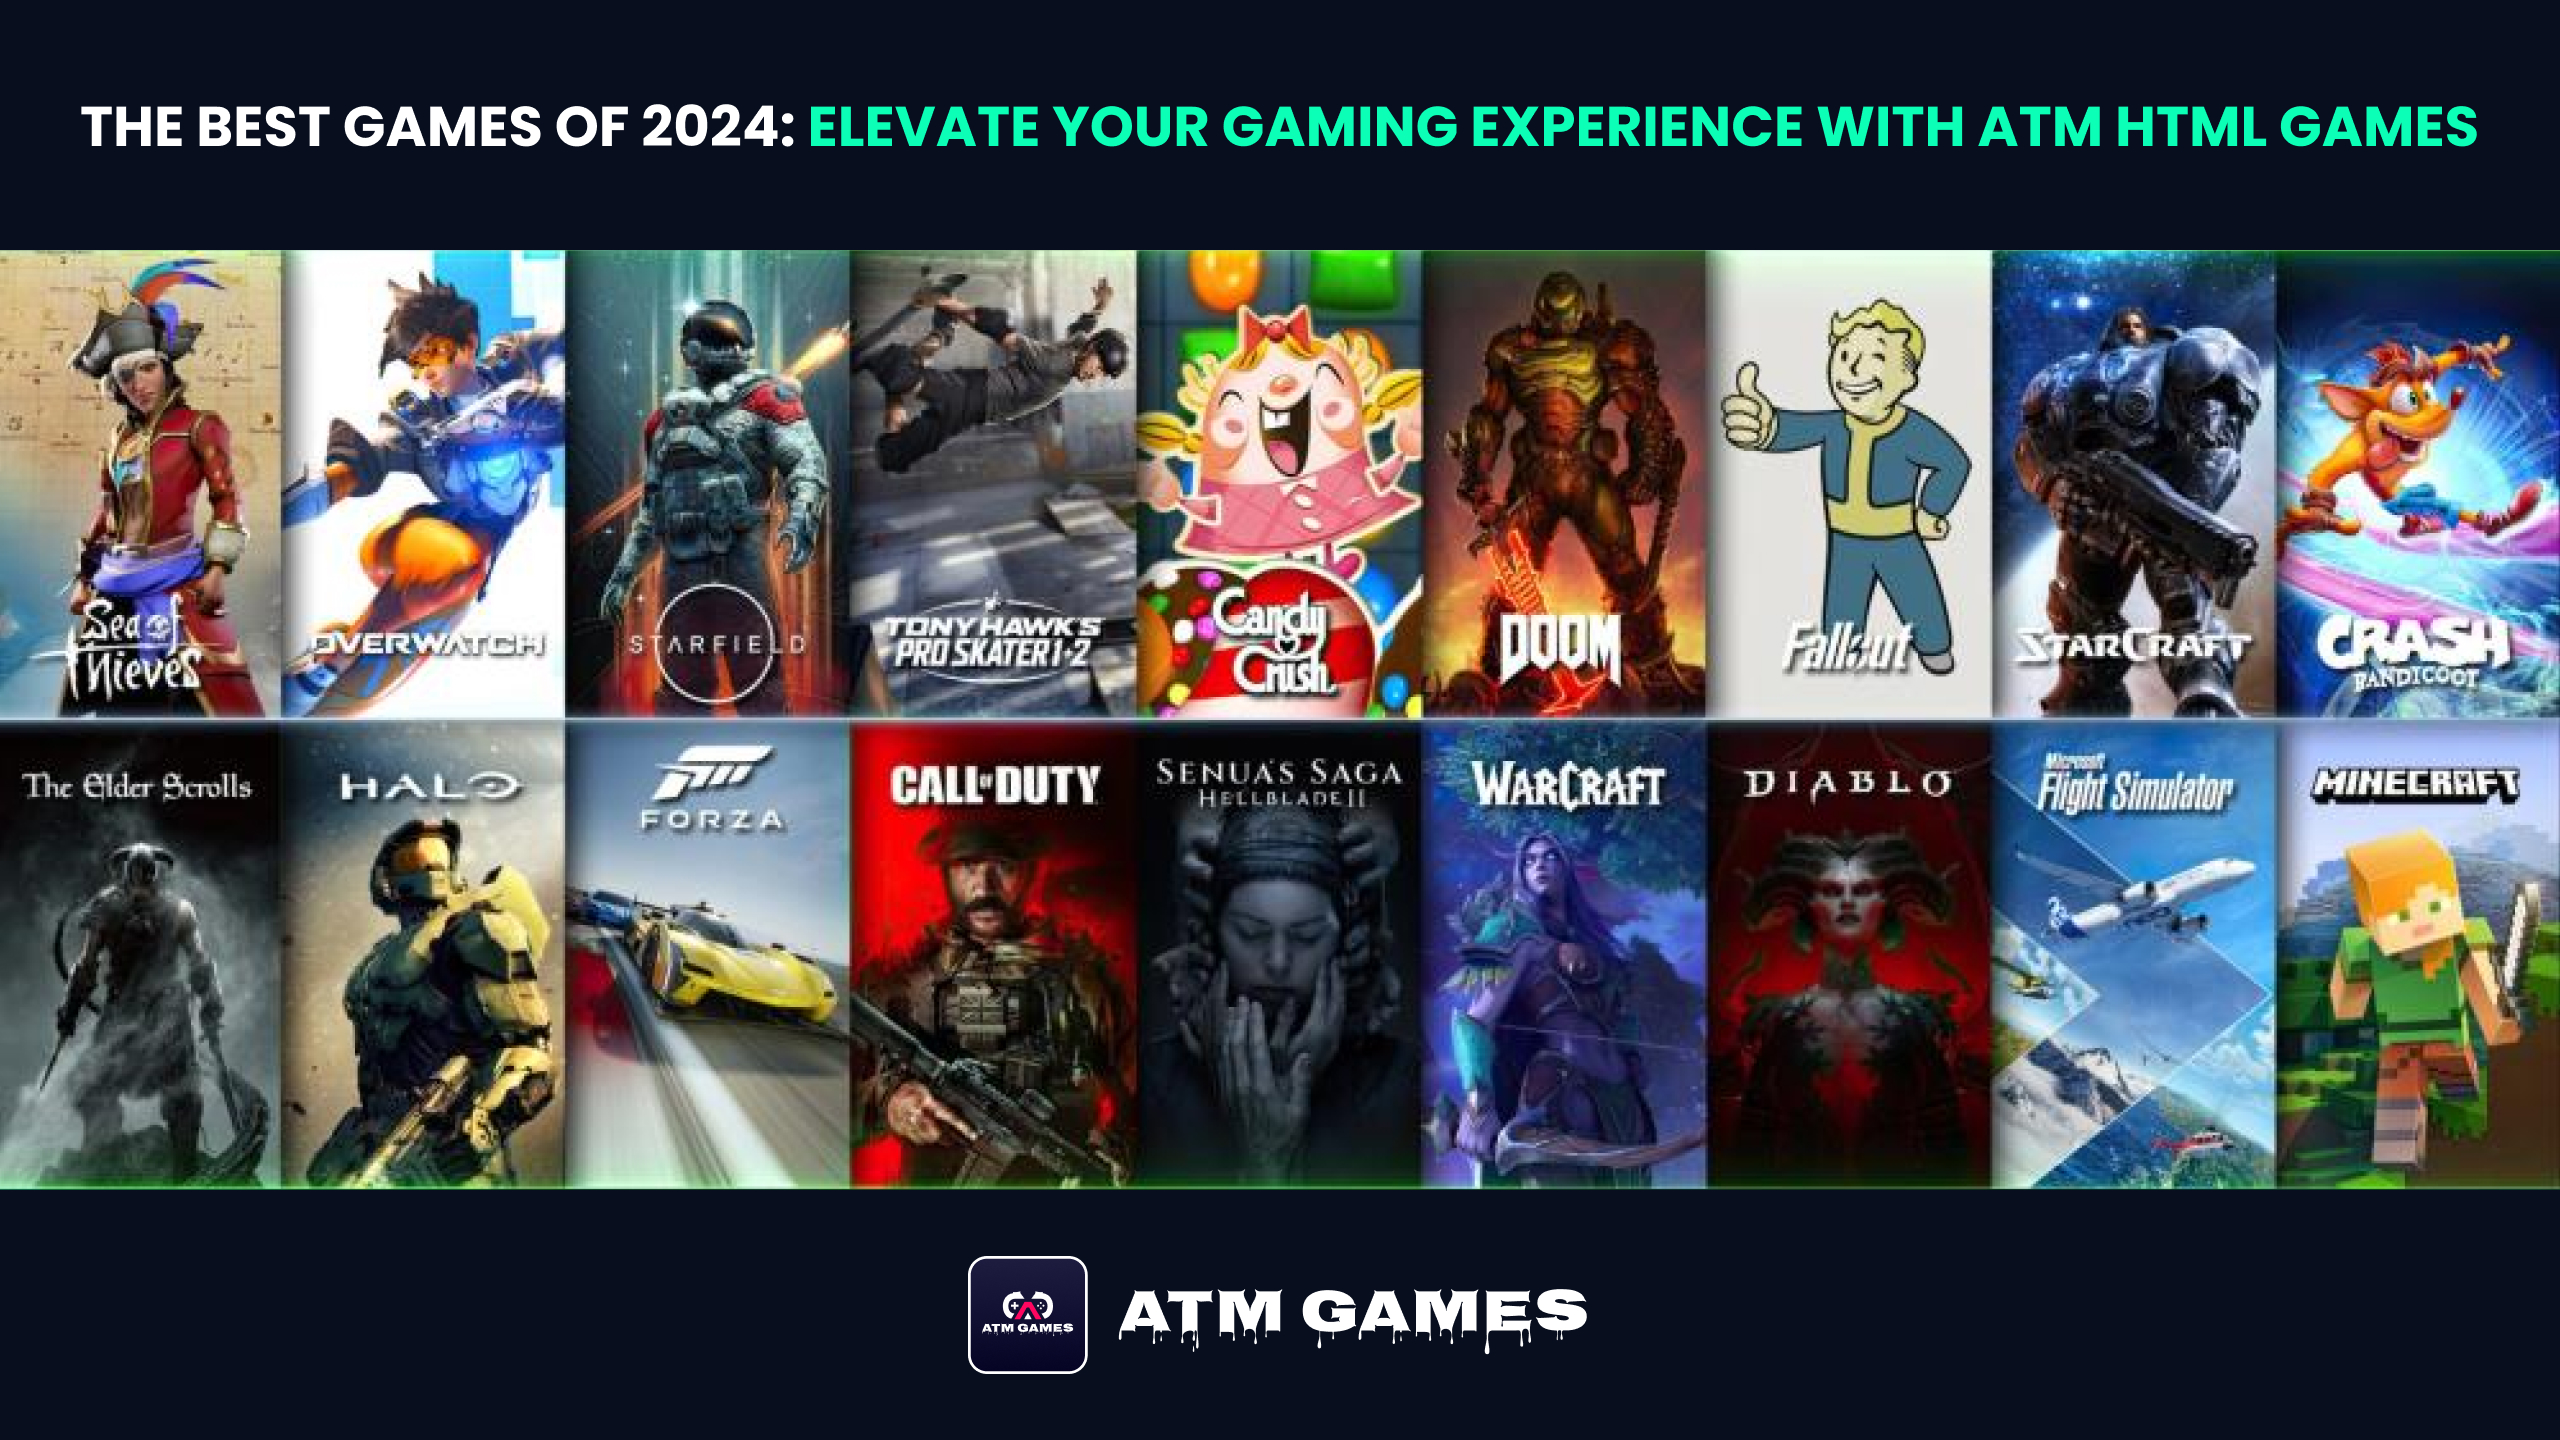 The Best Games of 2024: Elevate Your Gaming Experience with ATM Games